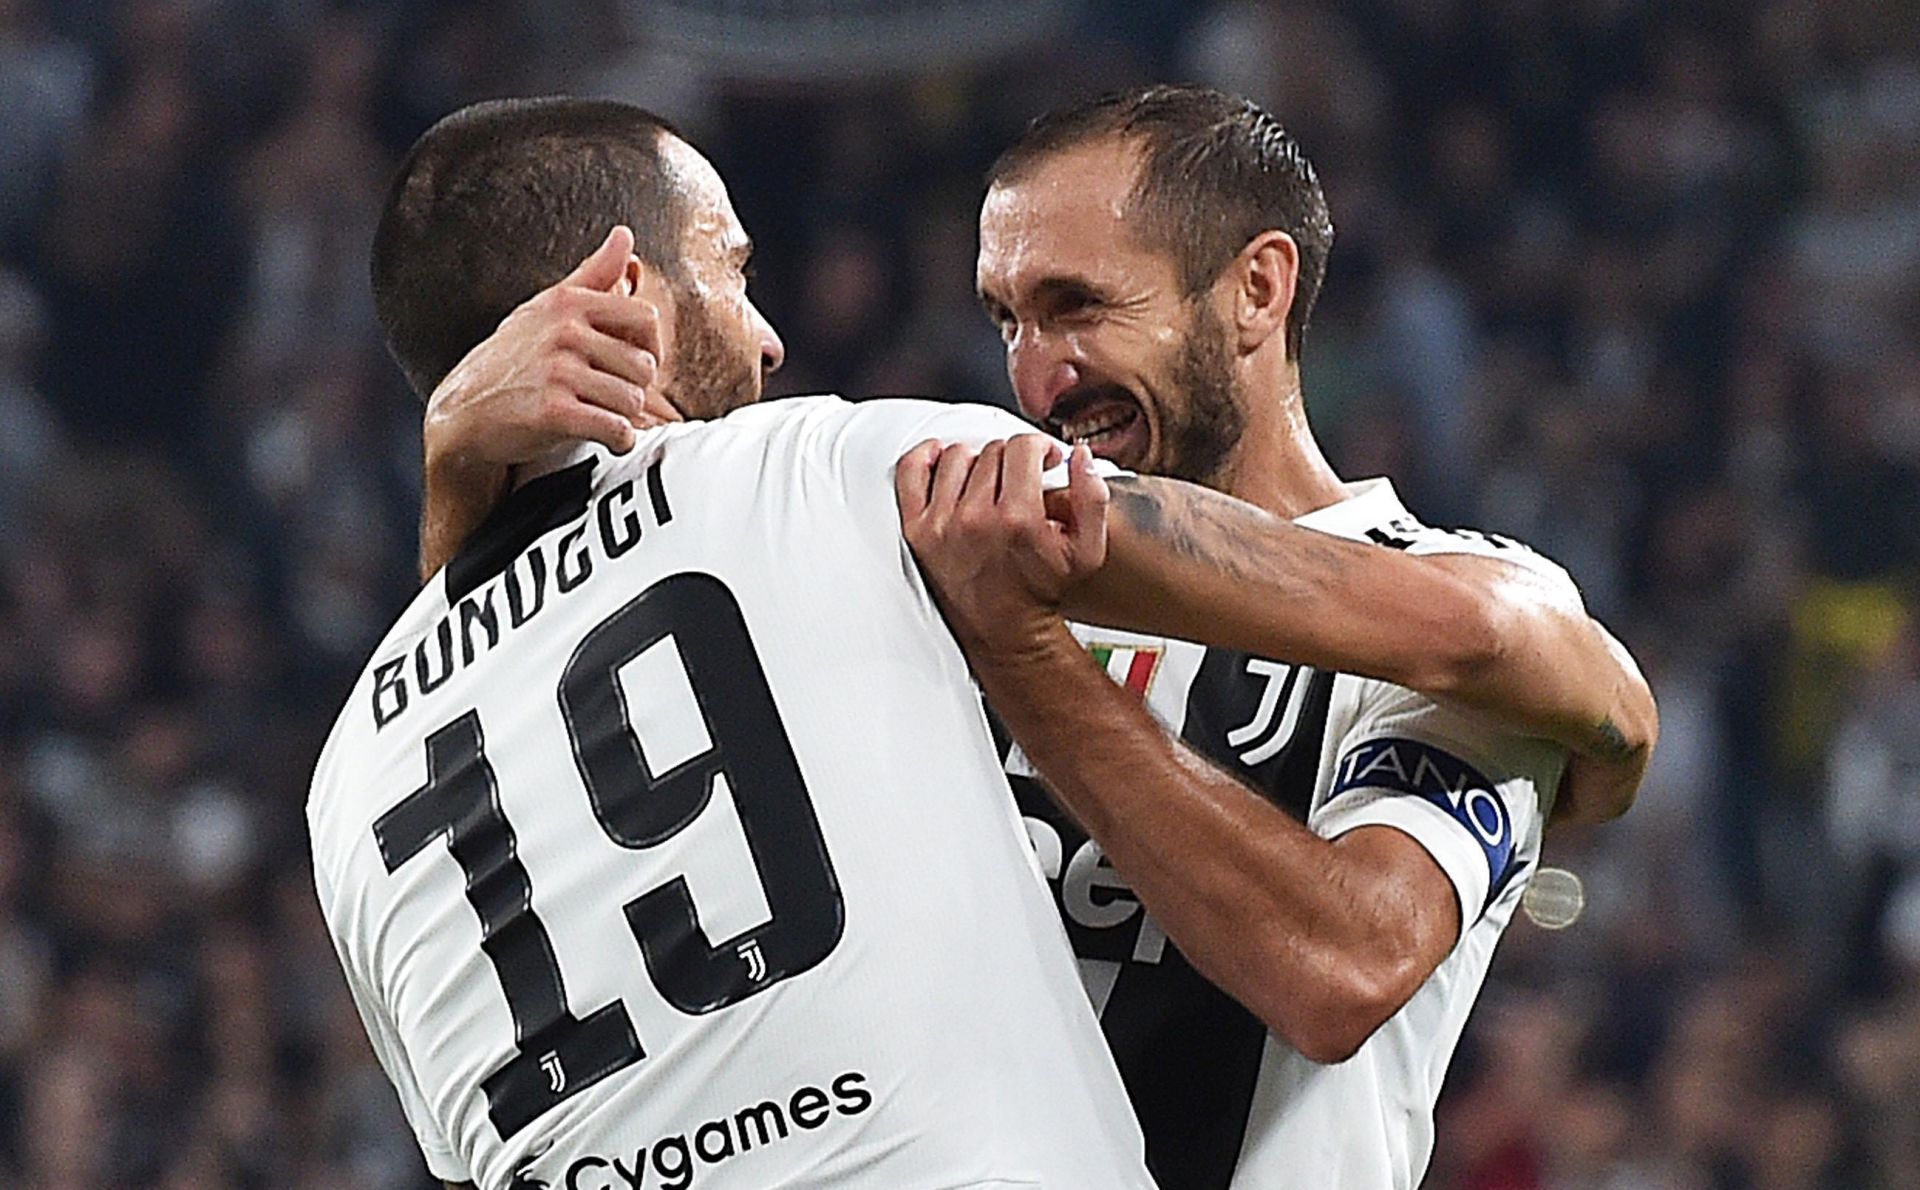 epa07057277 Juventus' Leonardo Bonucci  (L) celebrates with teammate Giorgio Chiellini after scoring a goal during the Italian Serie A soccer match between Juventus FC and SSC Napoli at Allianz Stadium in Turin, Italy, 29 September 2018.  EPA/ANDREA DI MARCO